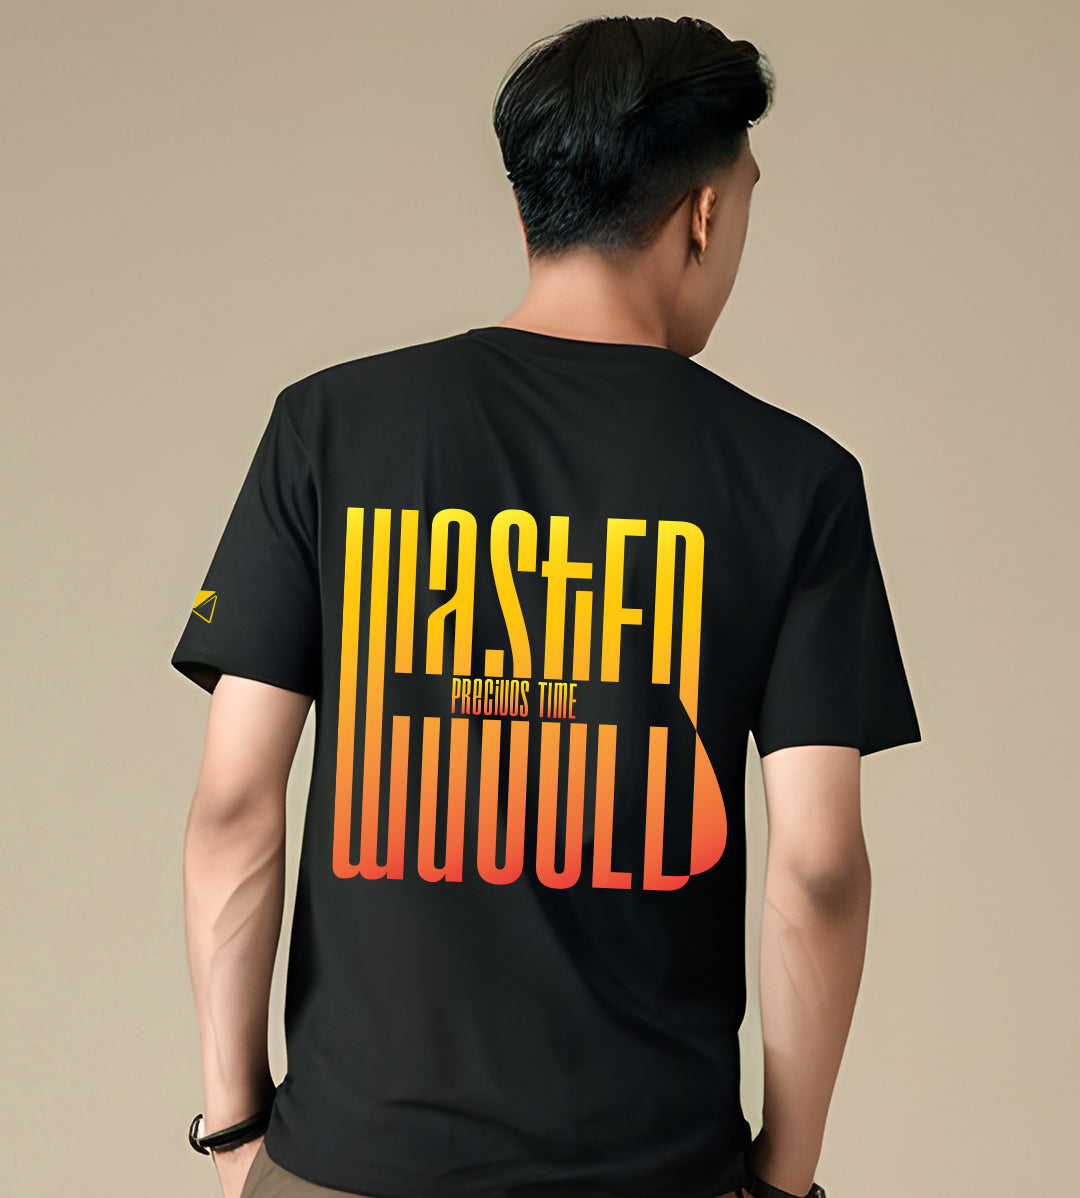 Precise Time Wasted T-Shirt